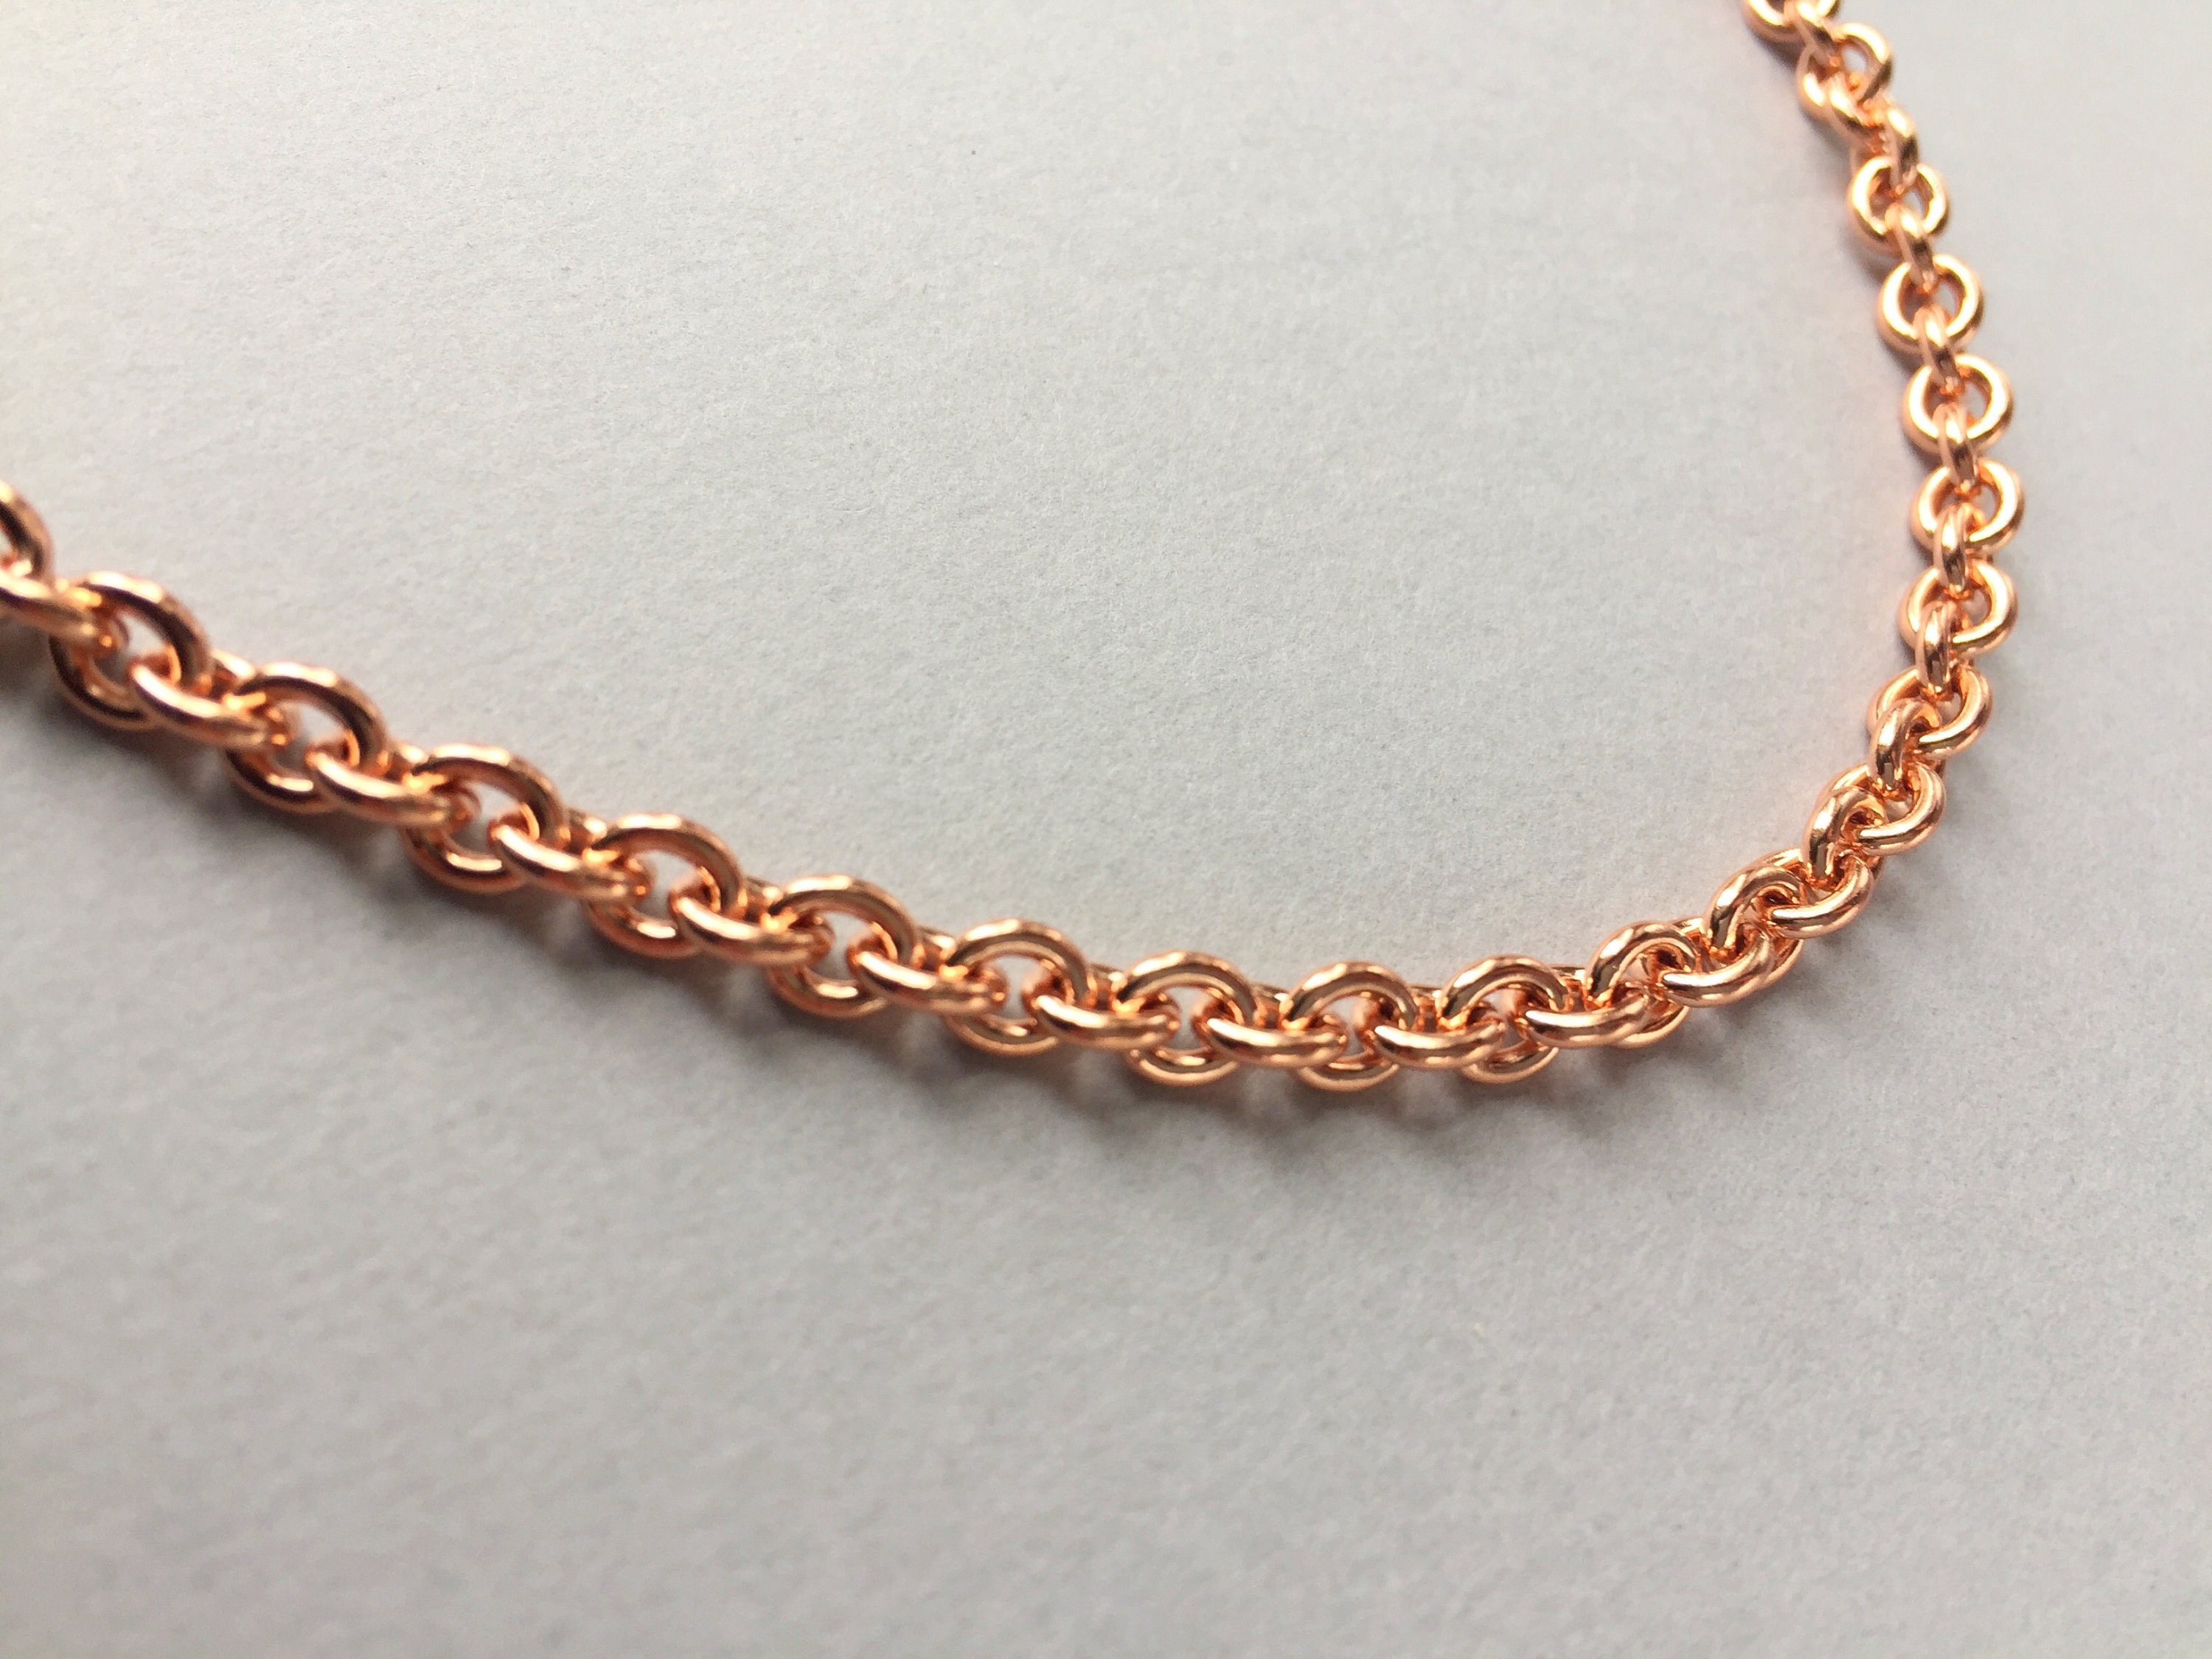 Thick Copper Chain Necklace, Big Clasp Necklace, Front Clasp Chain, Antique Copper Necklace, Chunky Copper Chain, Lobster Claw Carabiner Clip Clasp